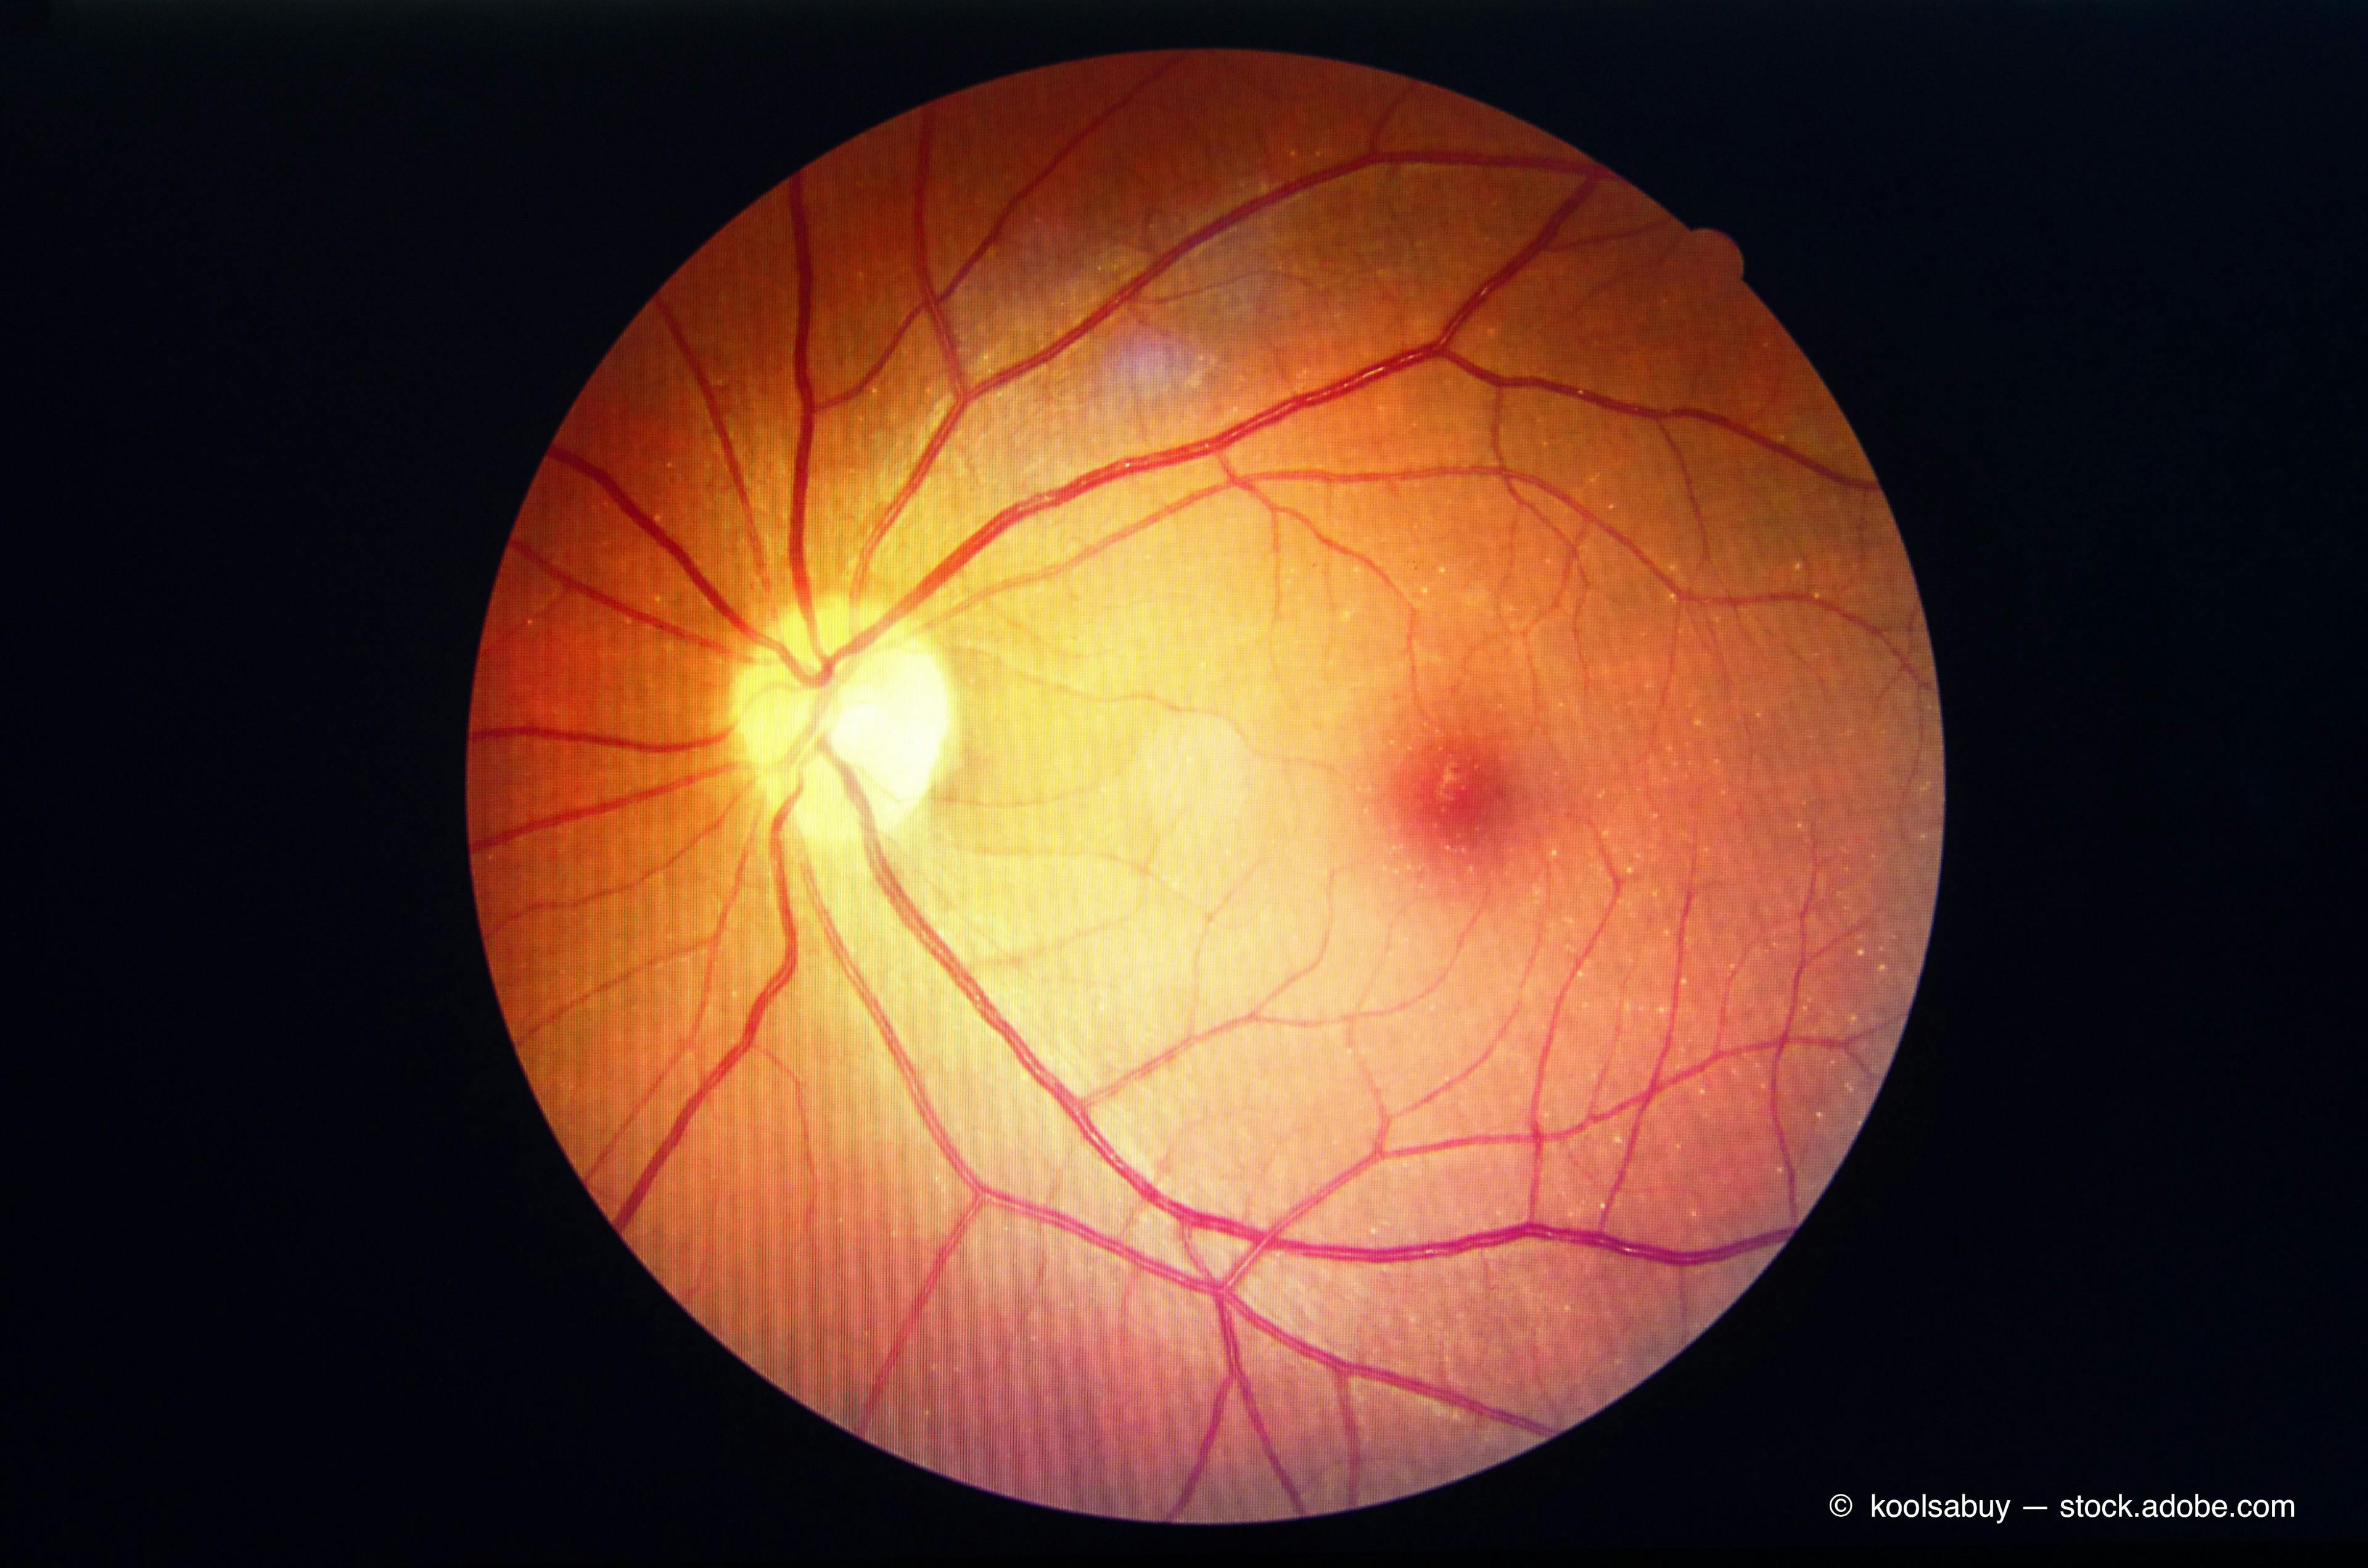 AI and tele-ophthalmology comparable for diagnosing diabetic retinopathy